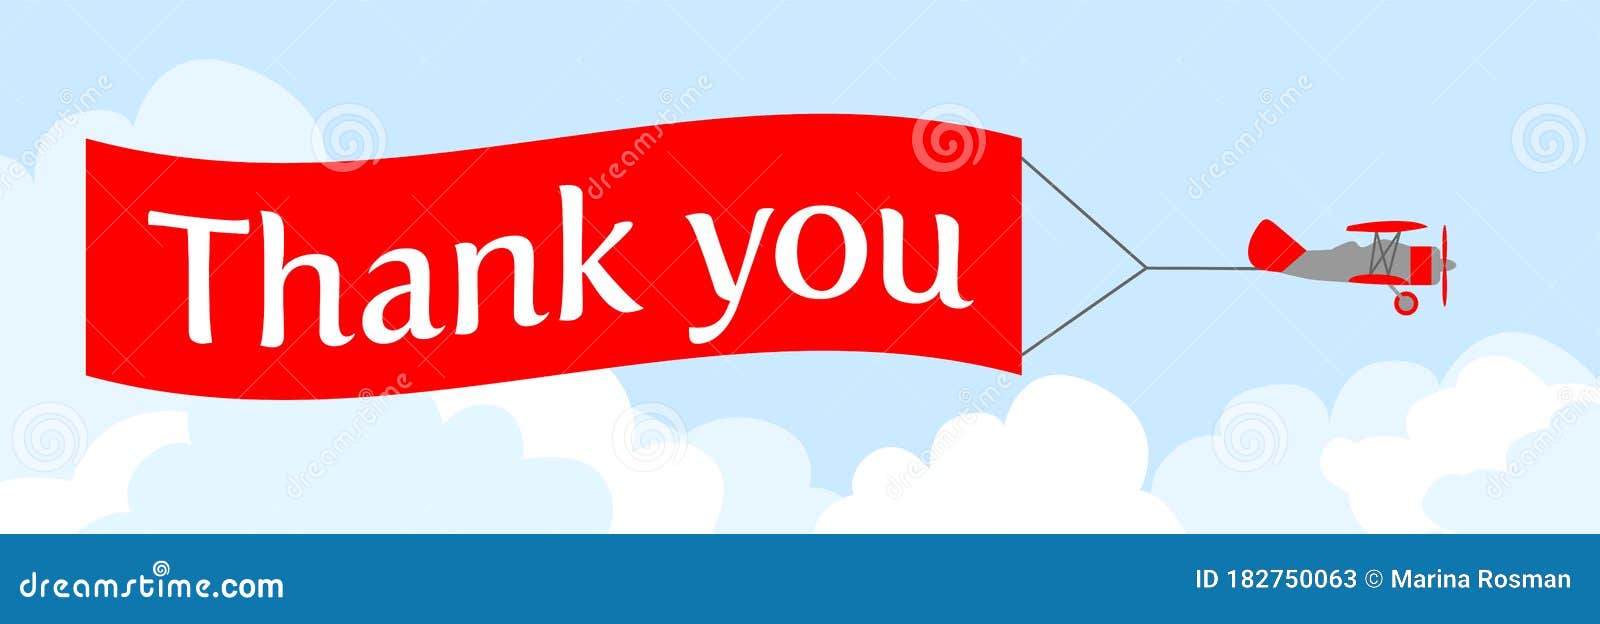 Thank You Airplane Stock Illustrations – 40 Thank You Airplane Stock  Illustrations, Vectors & Clipart - Dreamstime